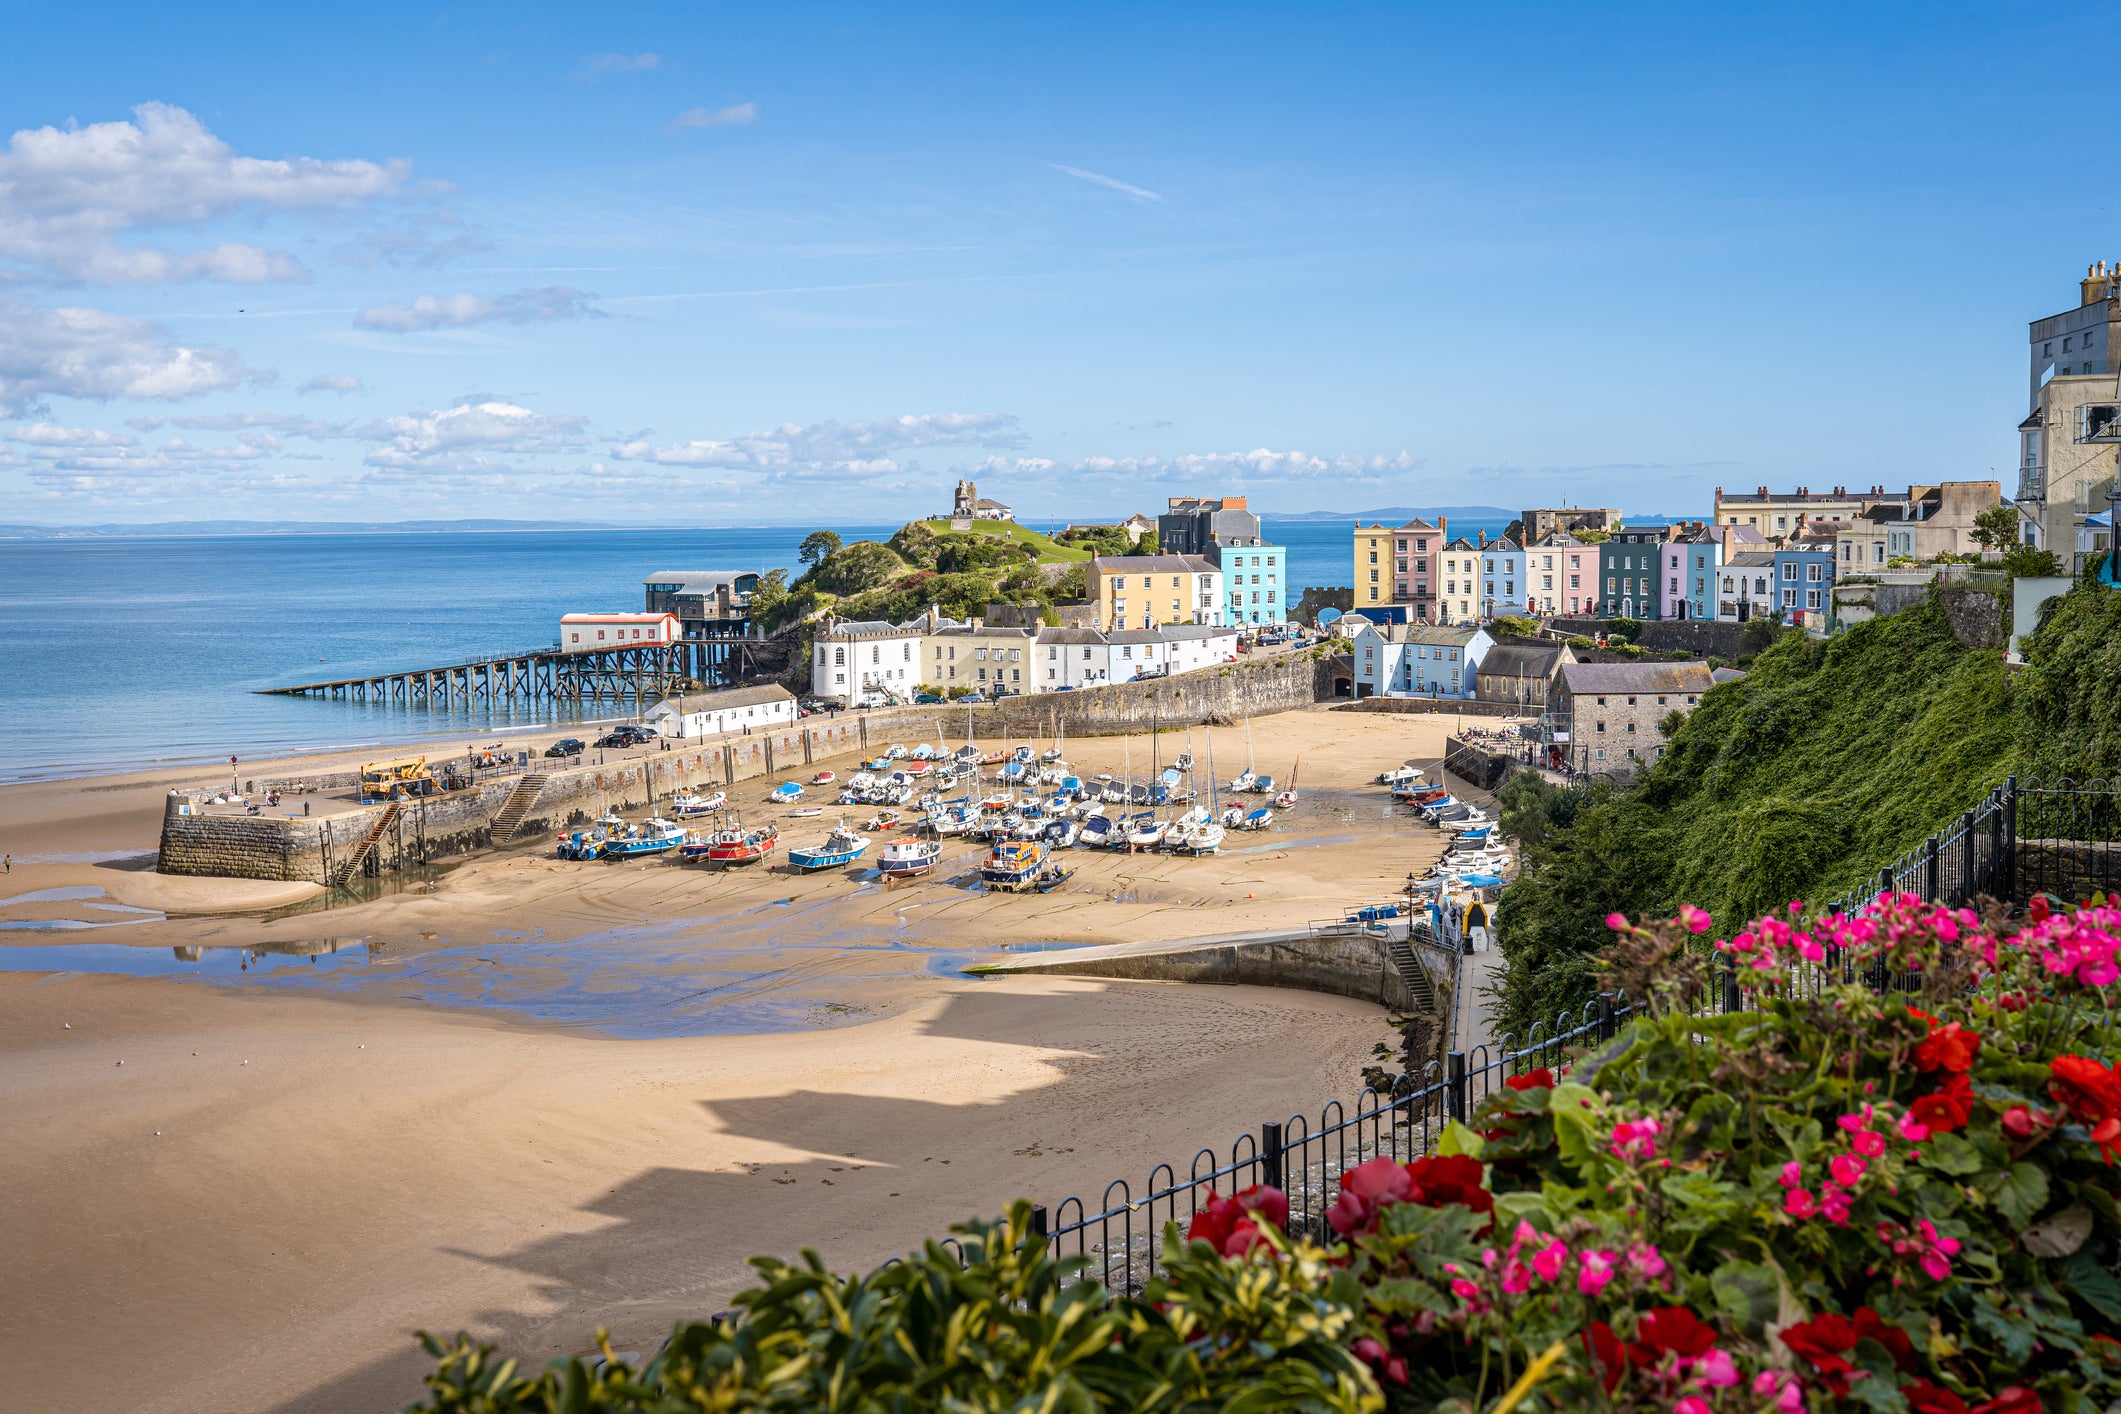 If the weather plays nicely, Tenby is more than a match for an overseas holiday